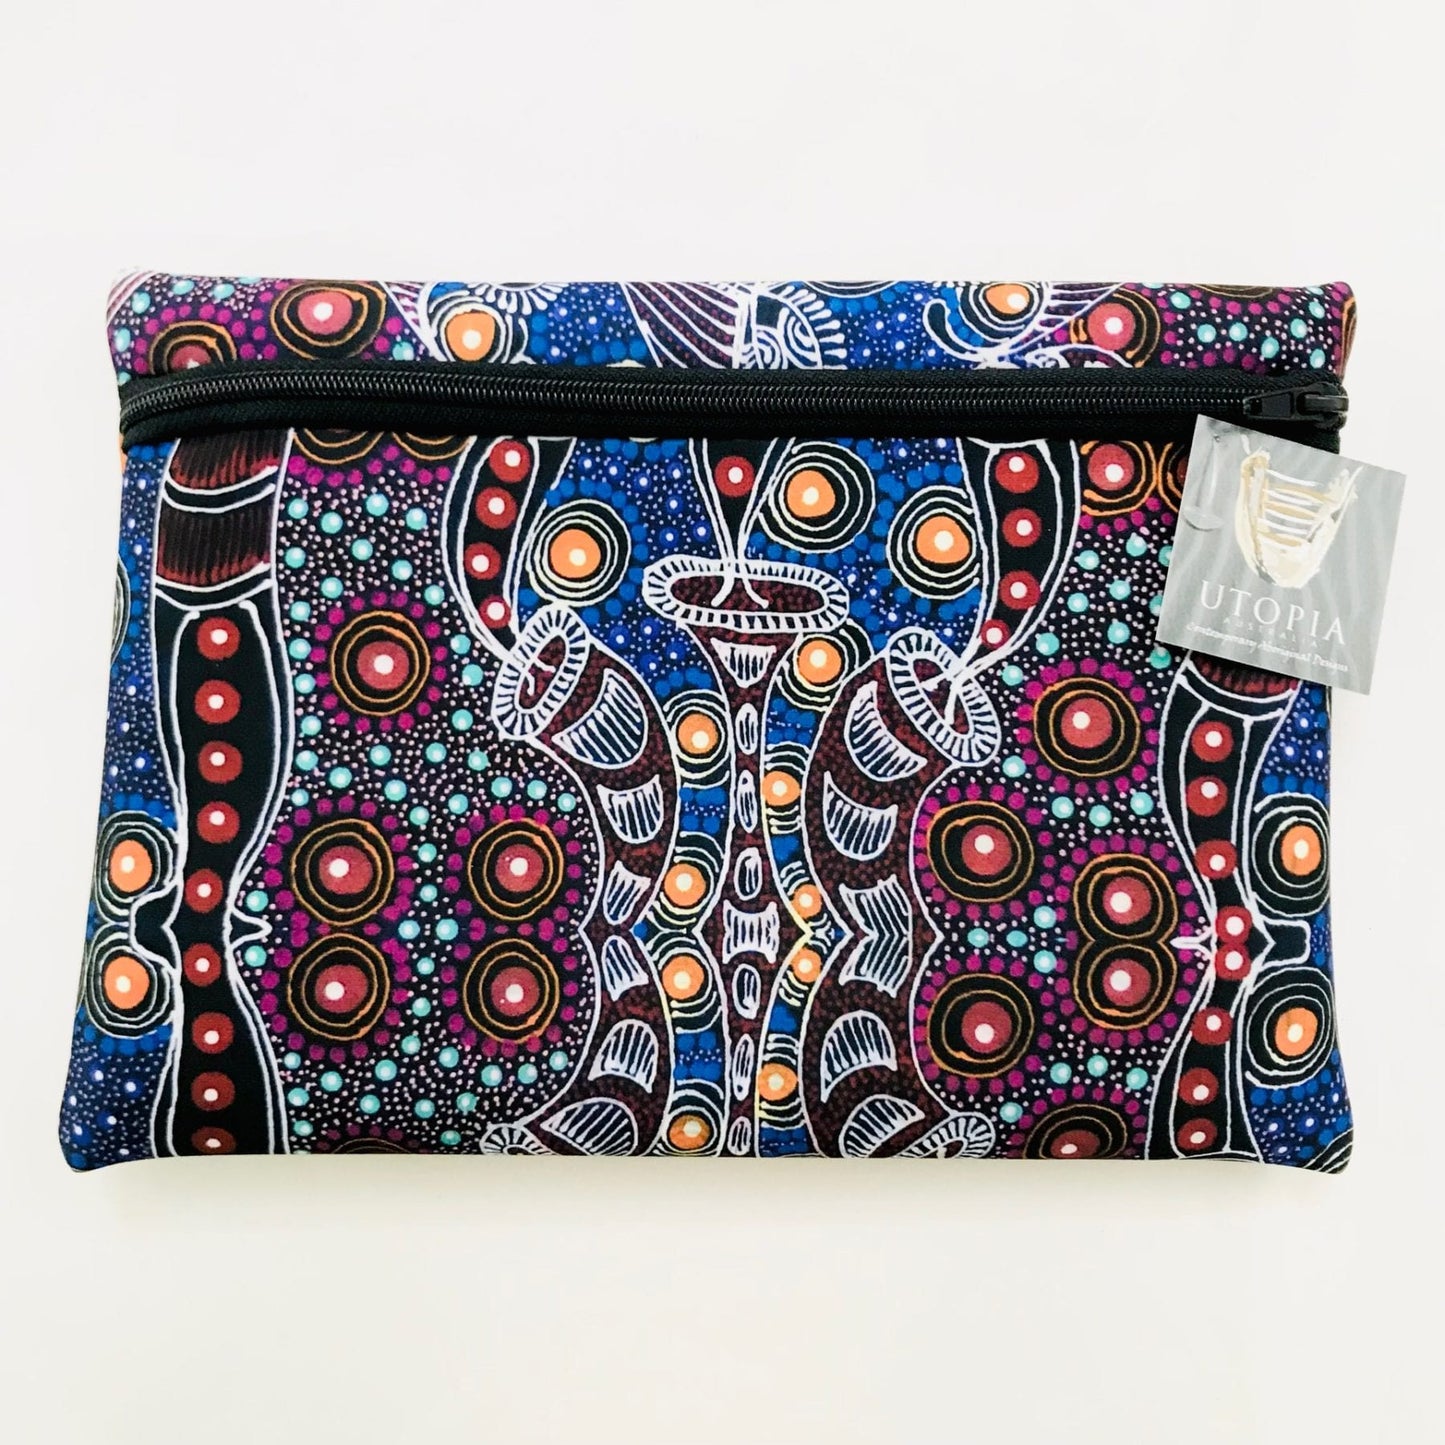 Utopia Zipped Case - Colleen Wallace Dreamtime Sisters 147